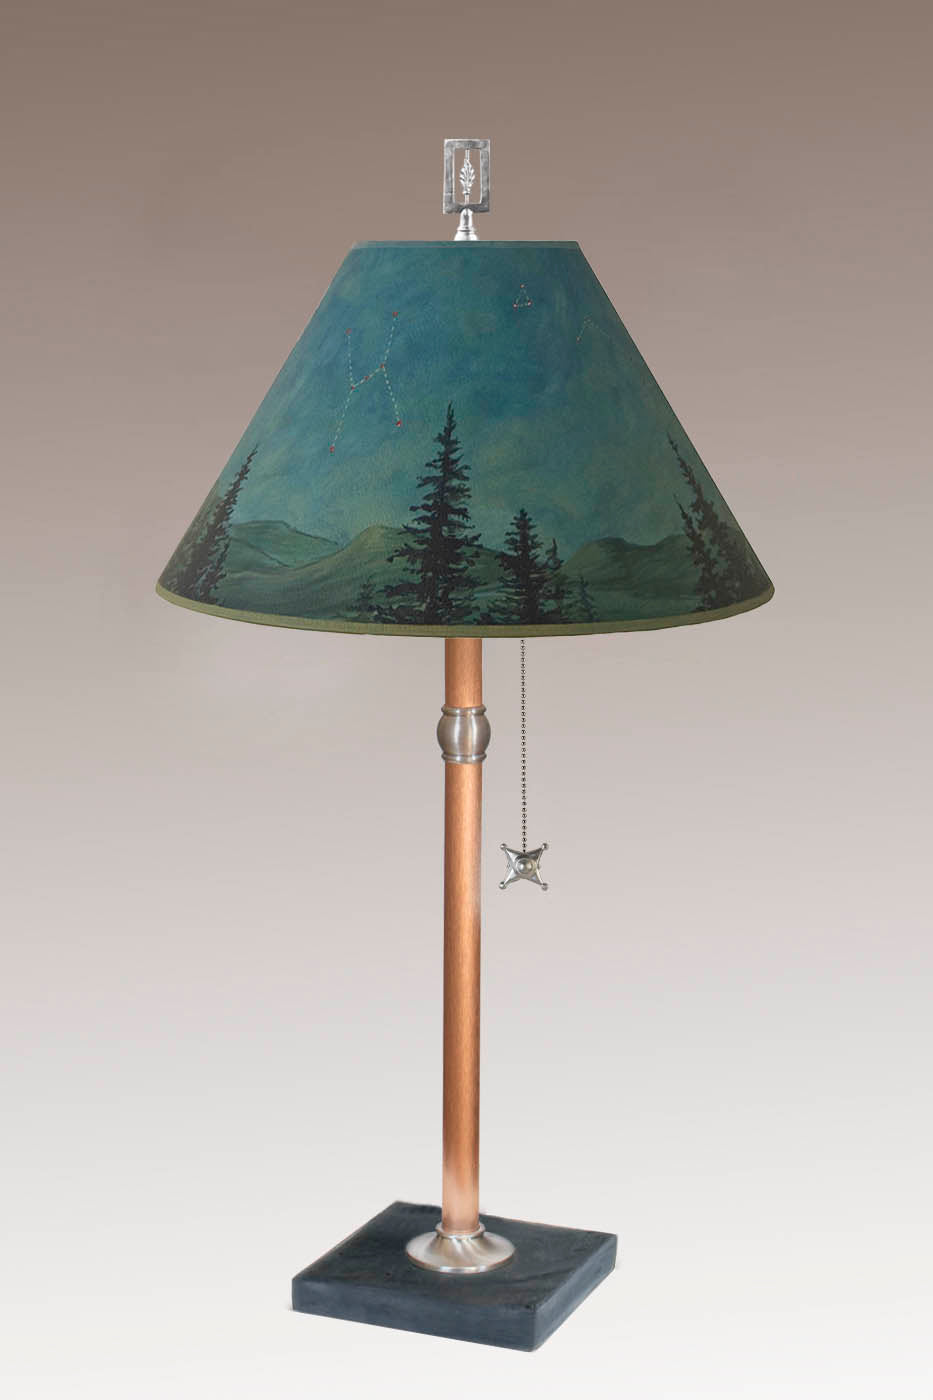 Copper Table Lamp with Medium Conical Shade in Midnight Sky